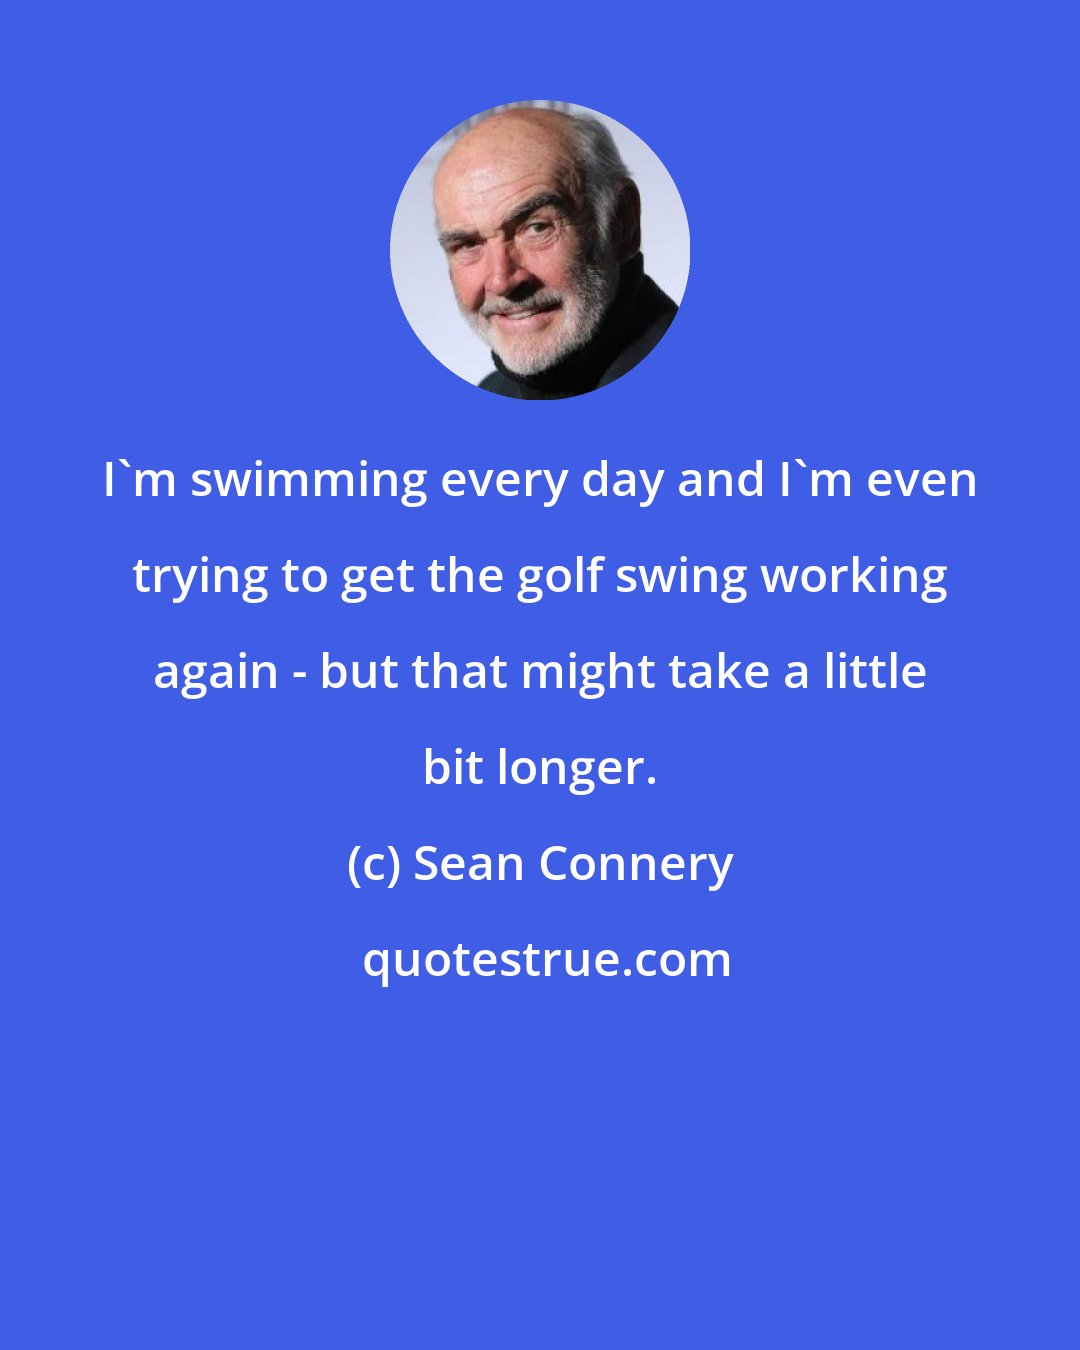 Sean Connery: I'm swimming every day and I'm even trying to get the golf swing working again - but that might take a little bit longer.